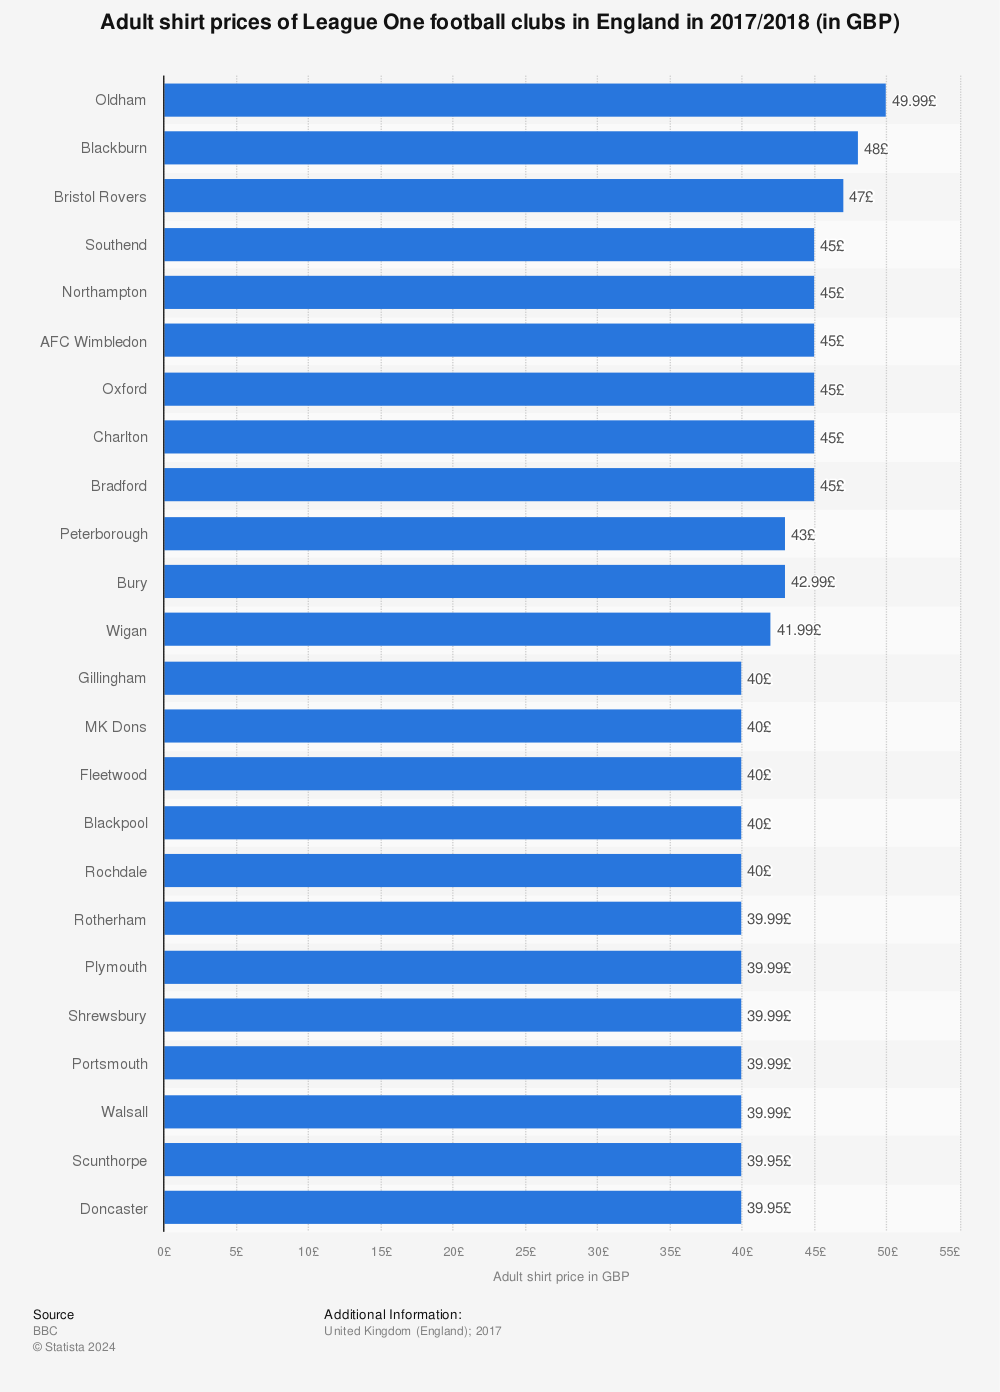 Statistic: Adult shirt prices of League One football clubs in England in 2017/2018 (in GBP) | Statista